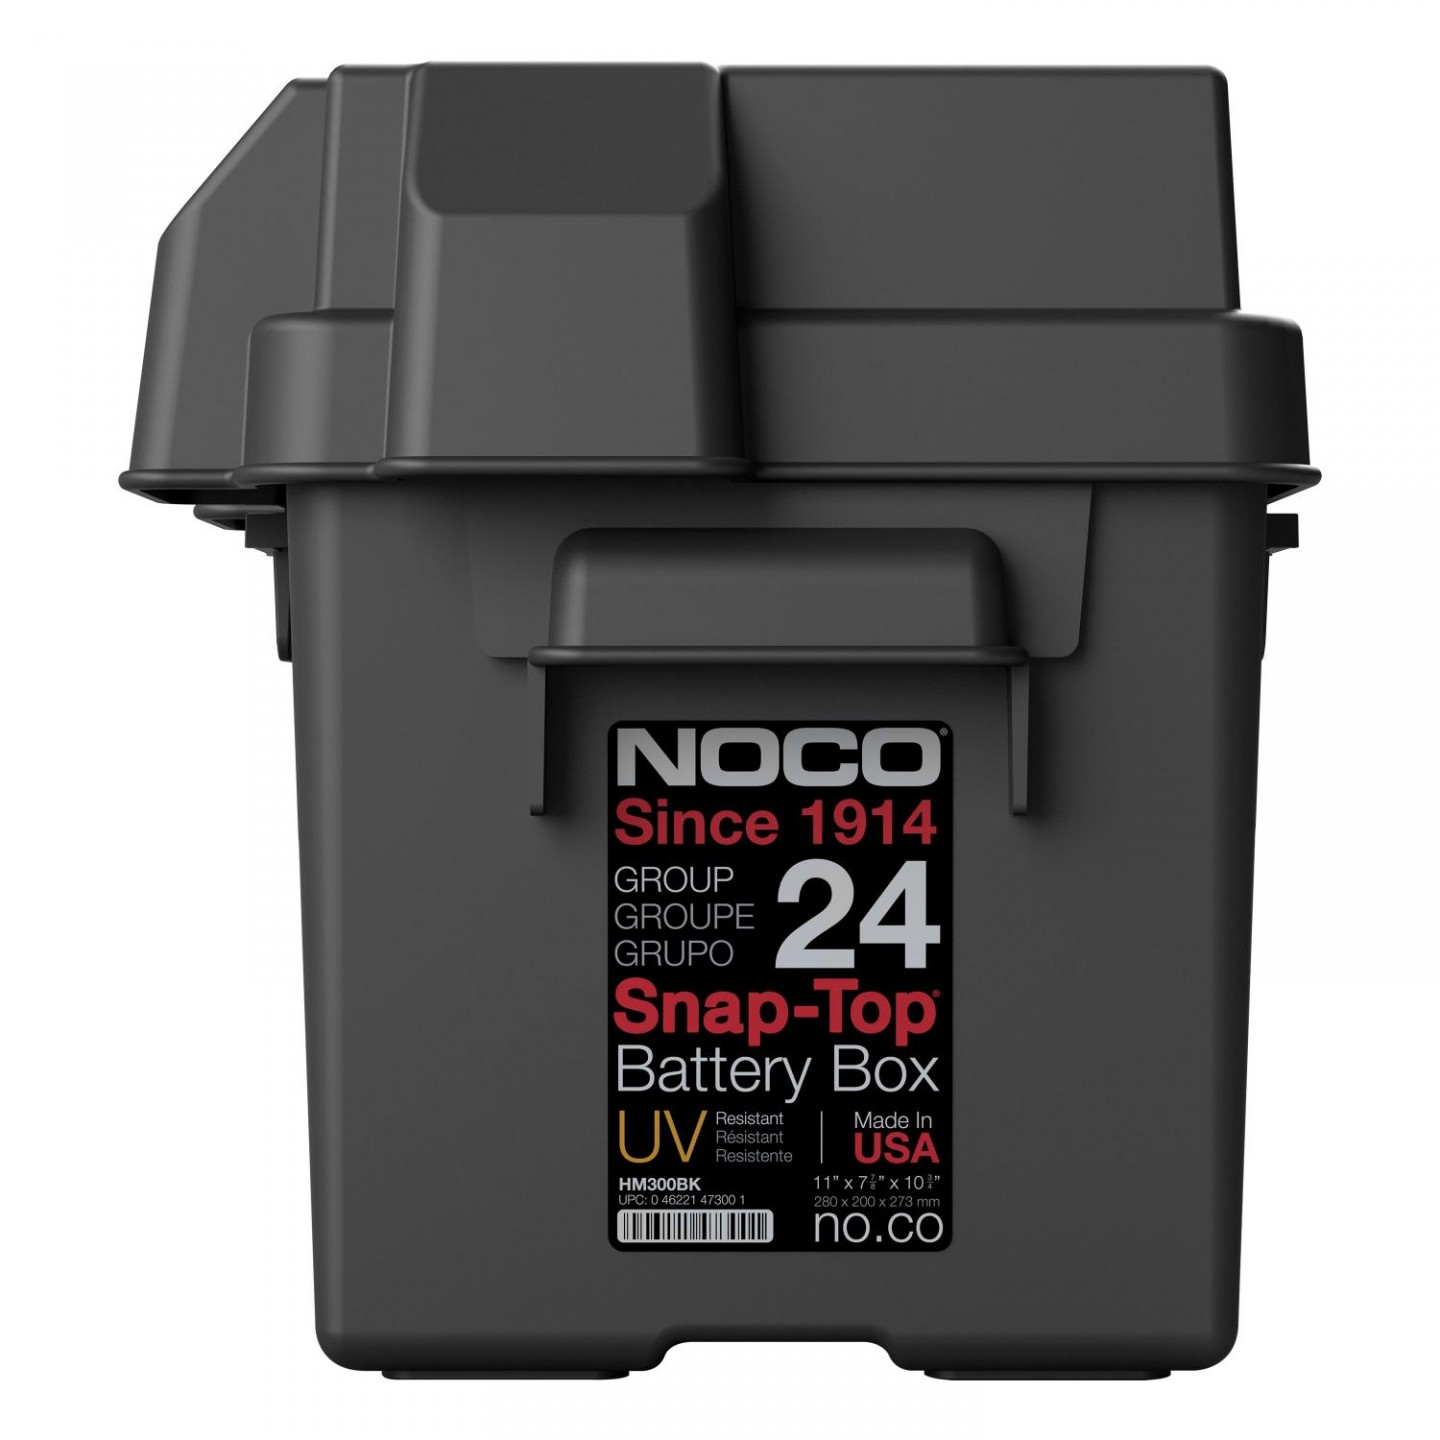 Noco Small Battery Box-Group 24, 9405613